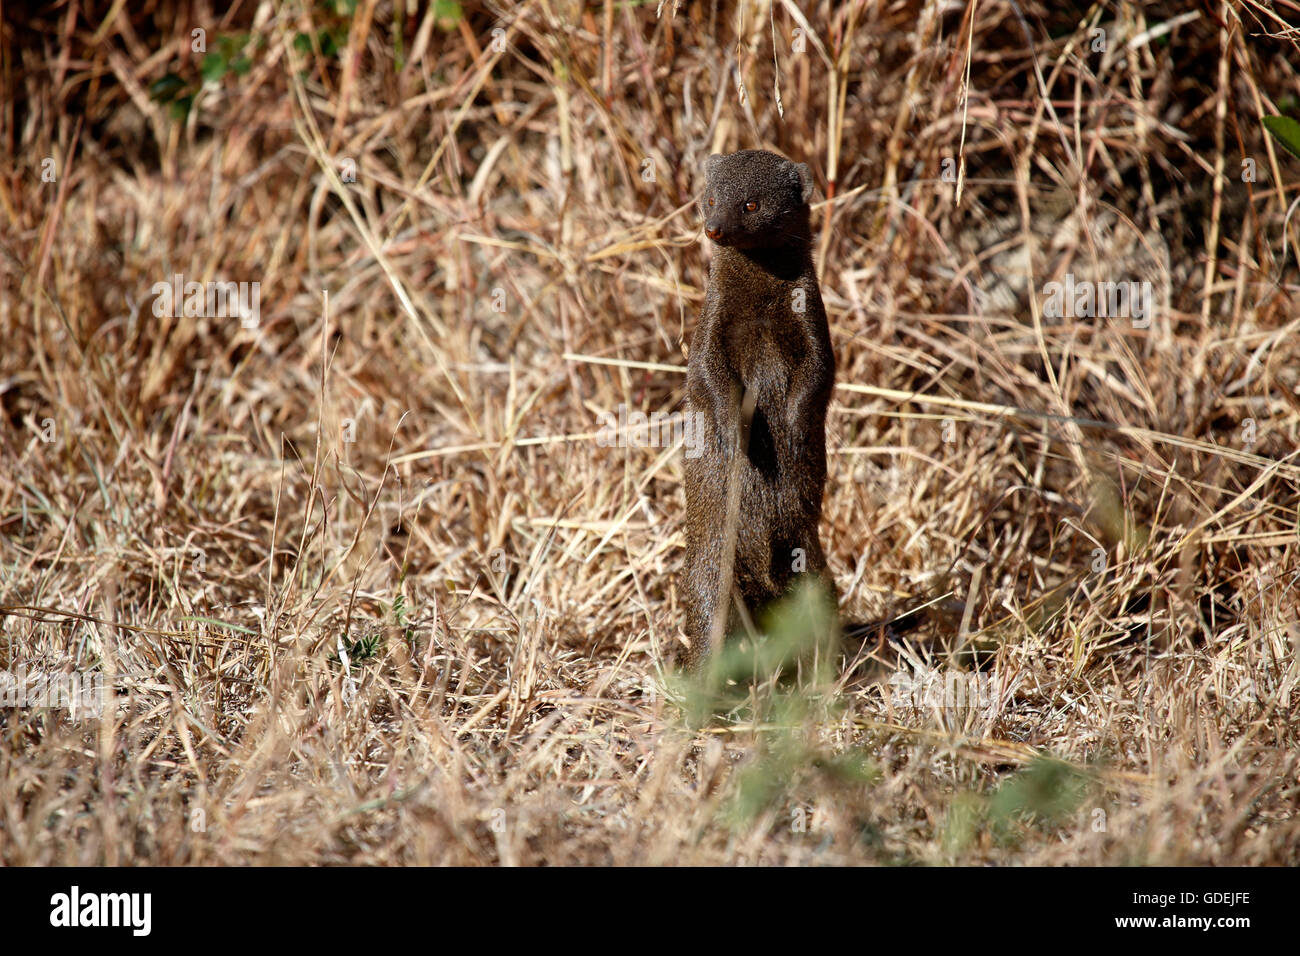 Portrait of a brown mongoose standing up, Kruger National Park, South Africa Stock Photo